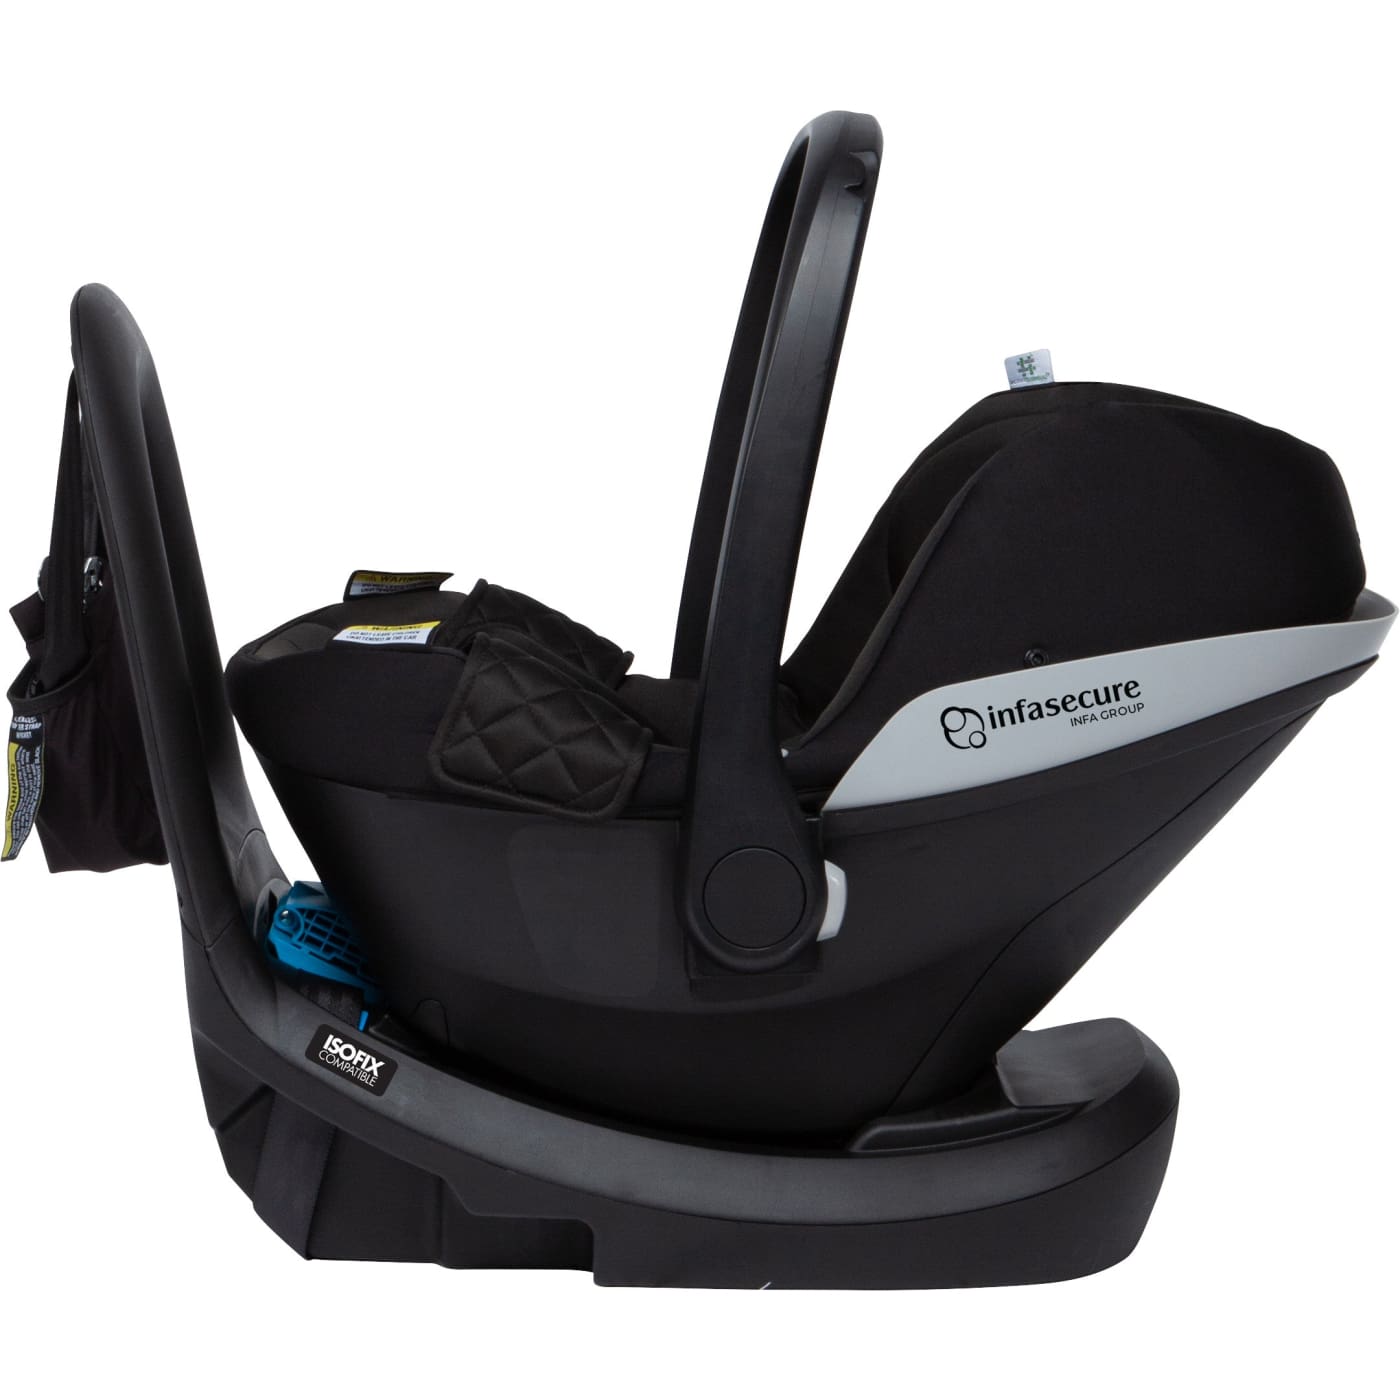 Infasecure Adapt ISOFIX Infant Carrier 0-6M - Dusk - 0-6m / Dusk - CAR SEATS - CAPSULES/CARRIERS ISOFIX (UP TO 12M)